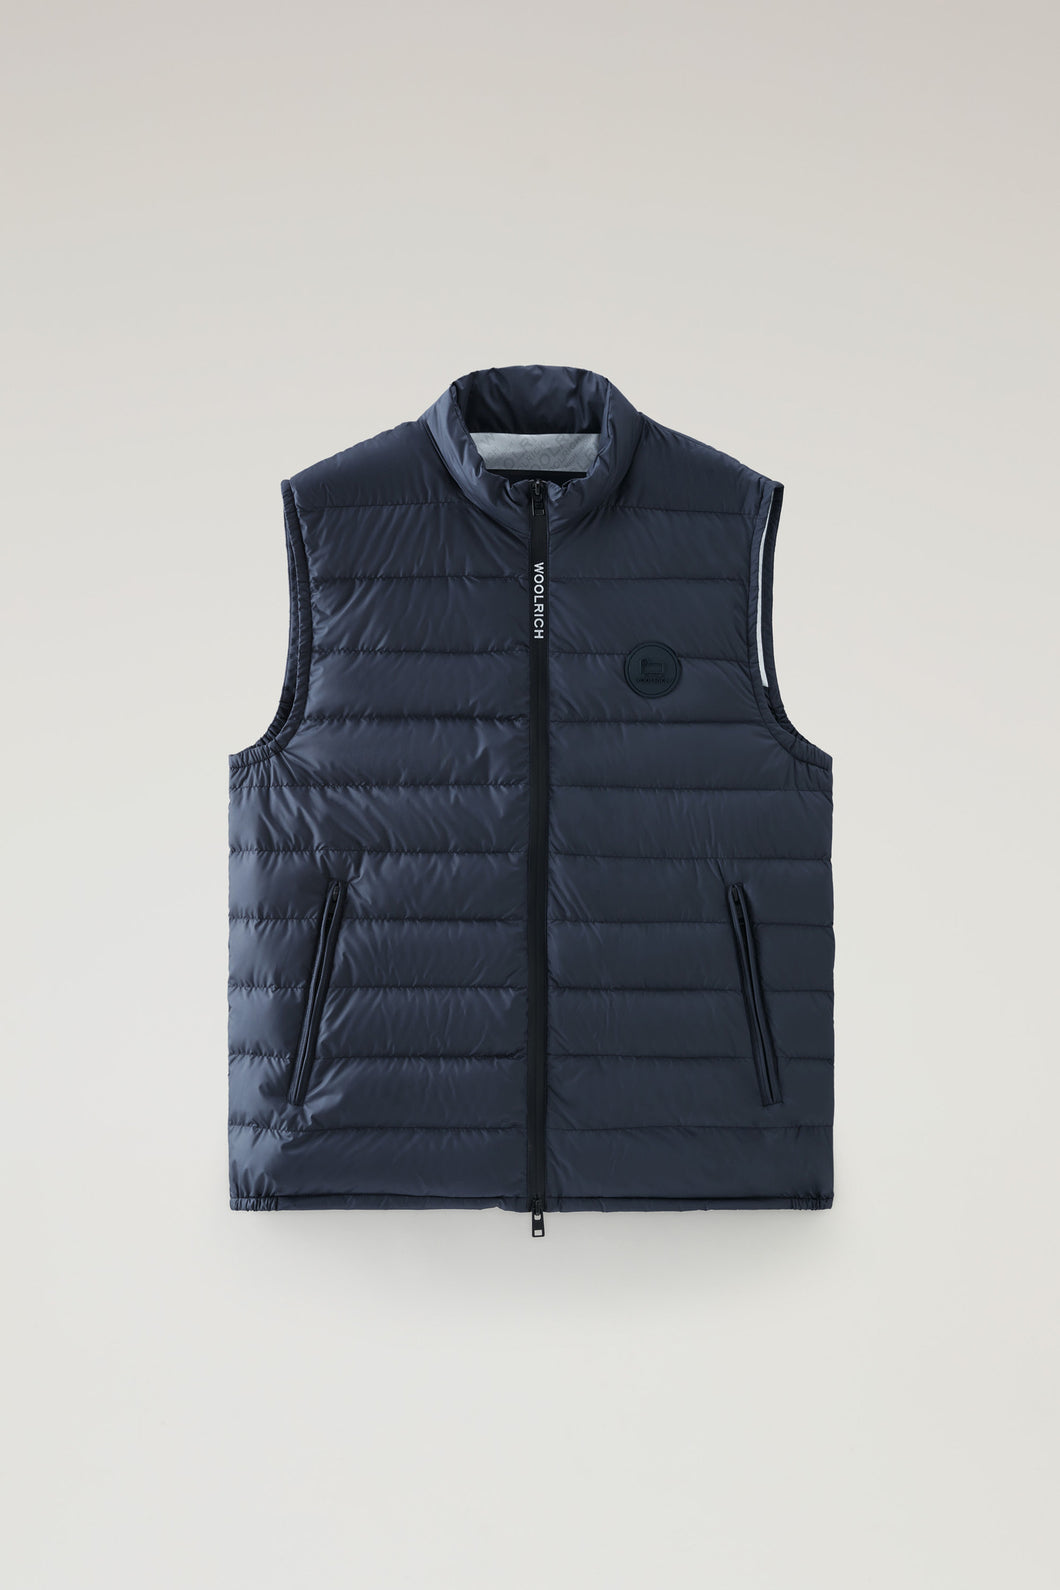 Woolrich Padded & Quilted Sundance Vest - Melton Blue